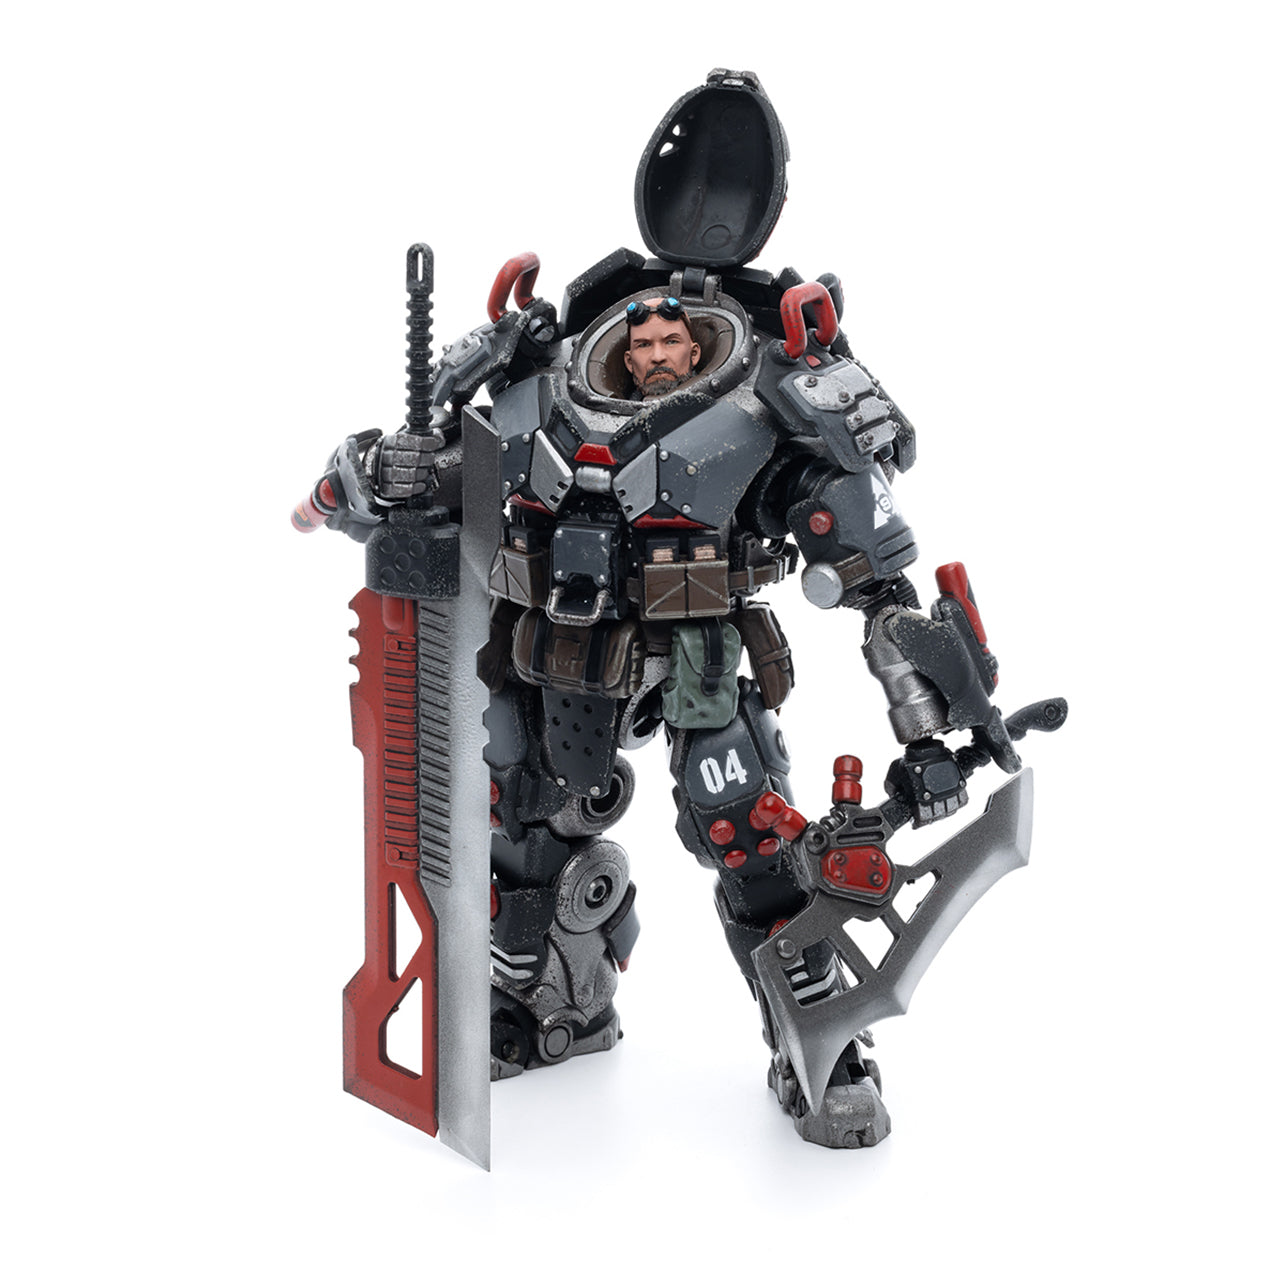 Sorrow Expeditionary Forces Obsidian Iron Knight Assaulter